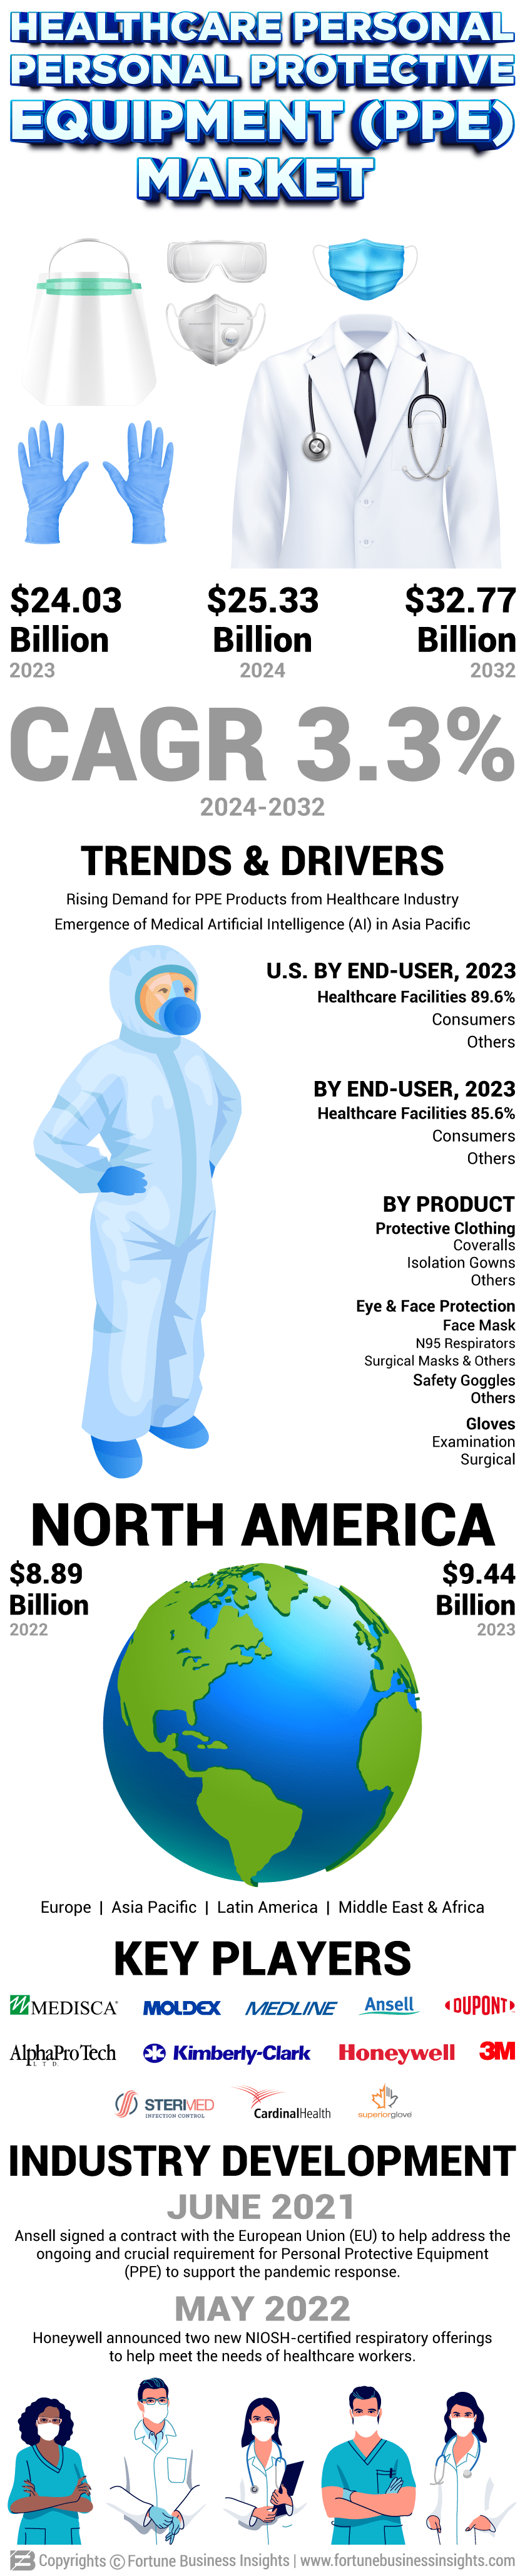 Healthcare Personal Protective Equipment (PPE) Market